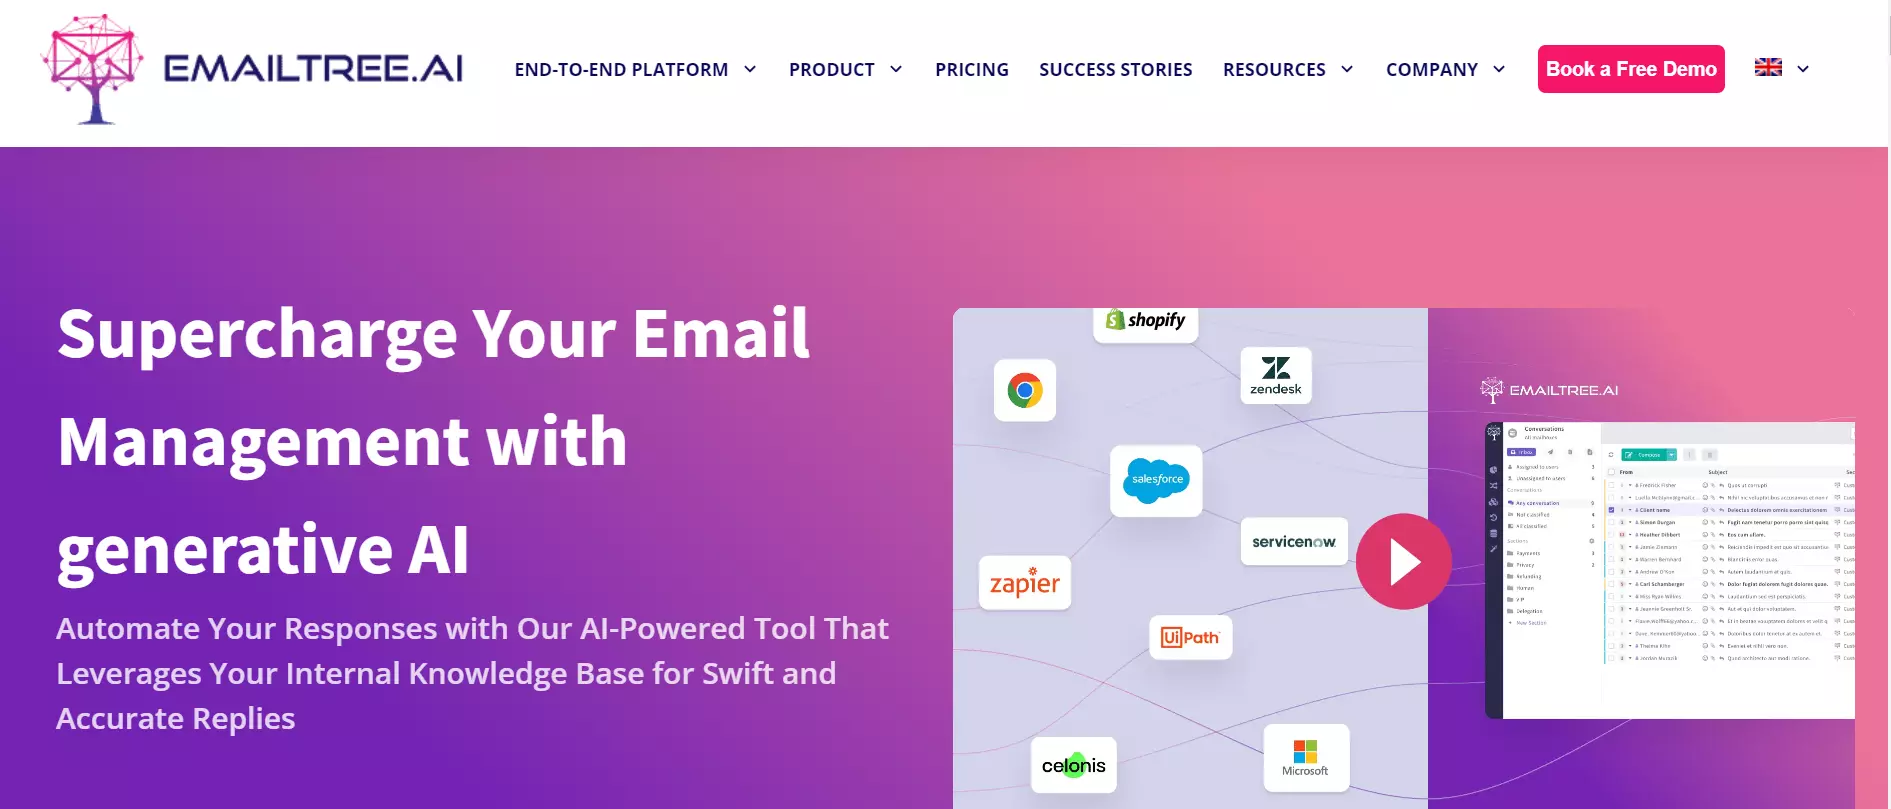 Email Tree AI used to manage all your email with AI powered revolution